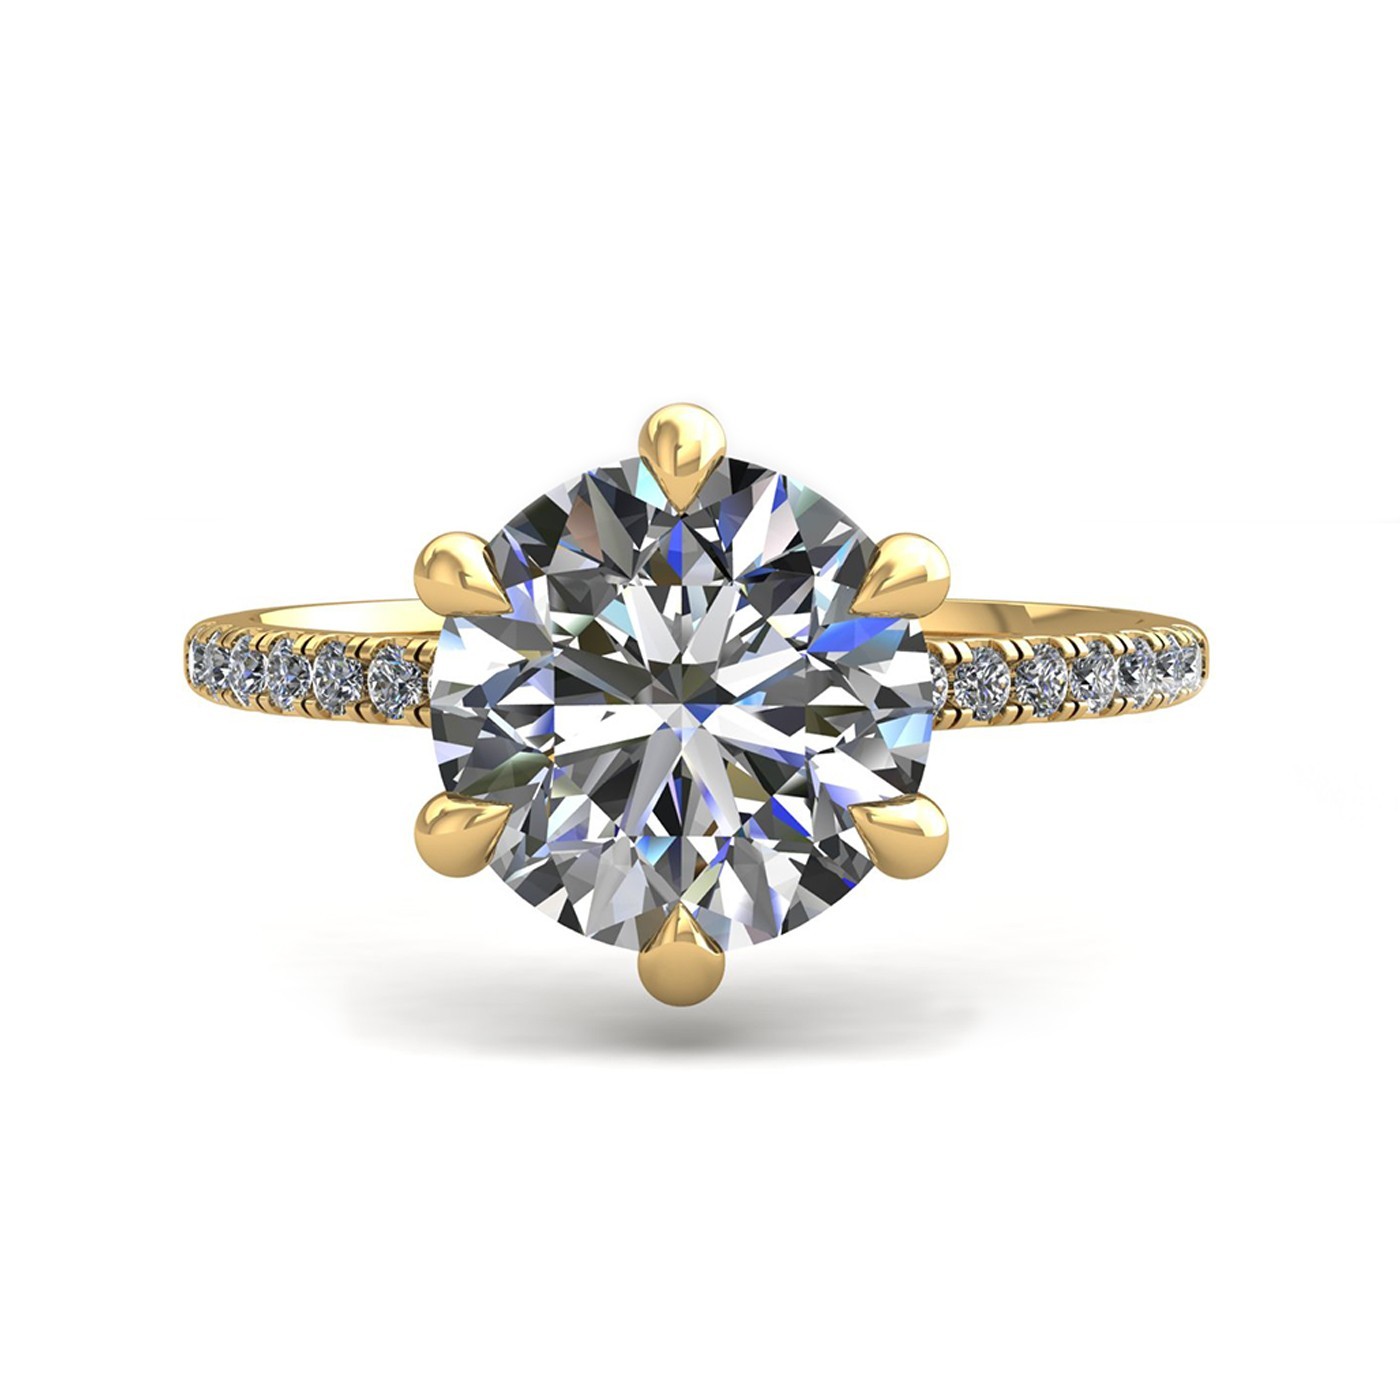 18k yellow gold 0,50 ct 6 prongs round cut diamond engagement ring with whisper thin pavÉ set band Photos & images